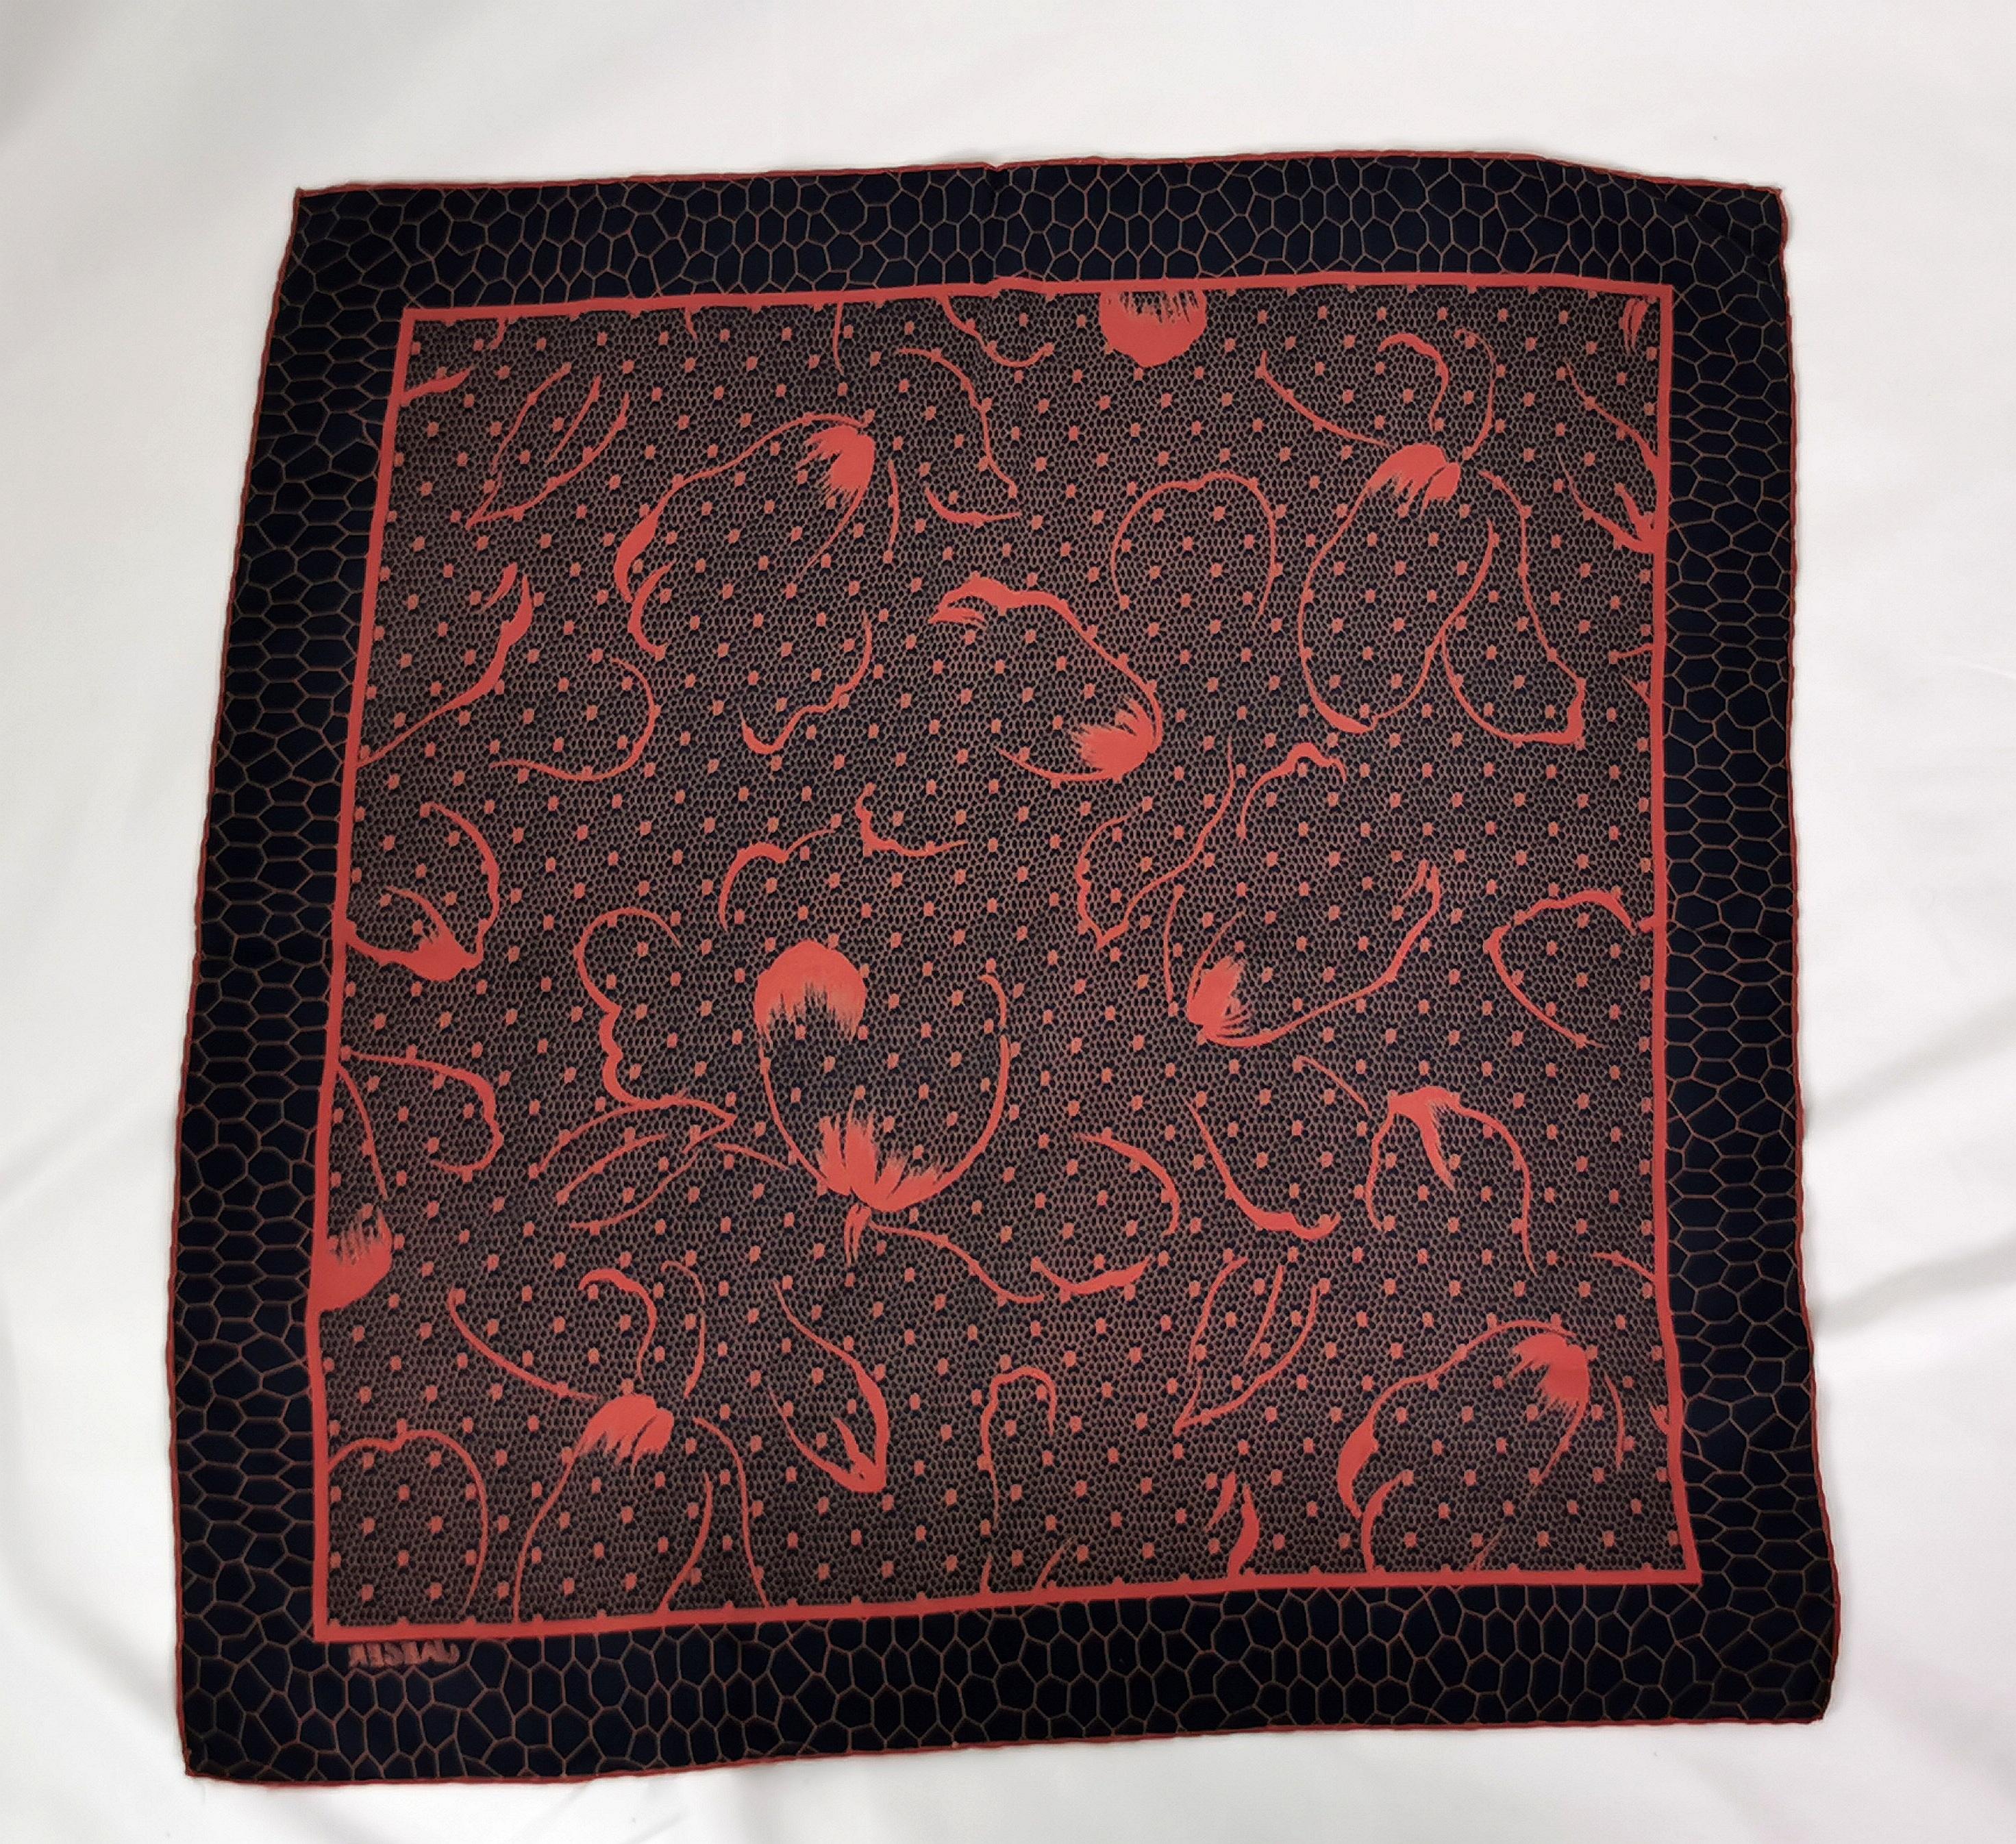 A very attractive vintage silk scarf by Jaeger.

It is a square shape, printed with a lovely abstract floral print in a rich warm orange on a deep navy blue ground.

A beautiful piece and versatile too, can be used in many ways and has a lovely